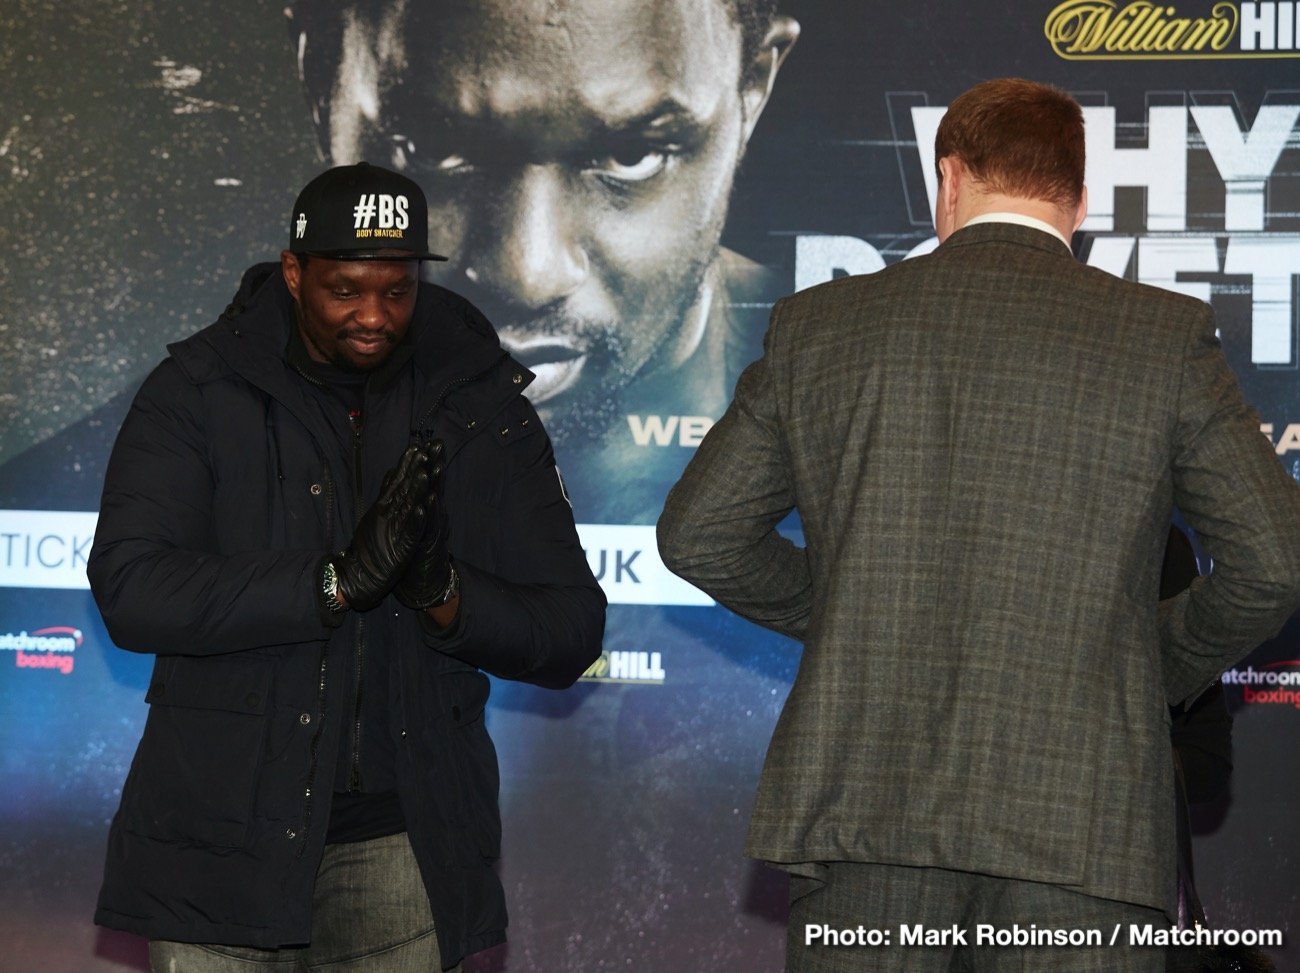 Image: WBC to order Whyte's title shot after Fury vs. Wilder 3 match